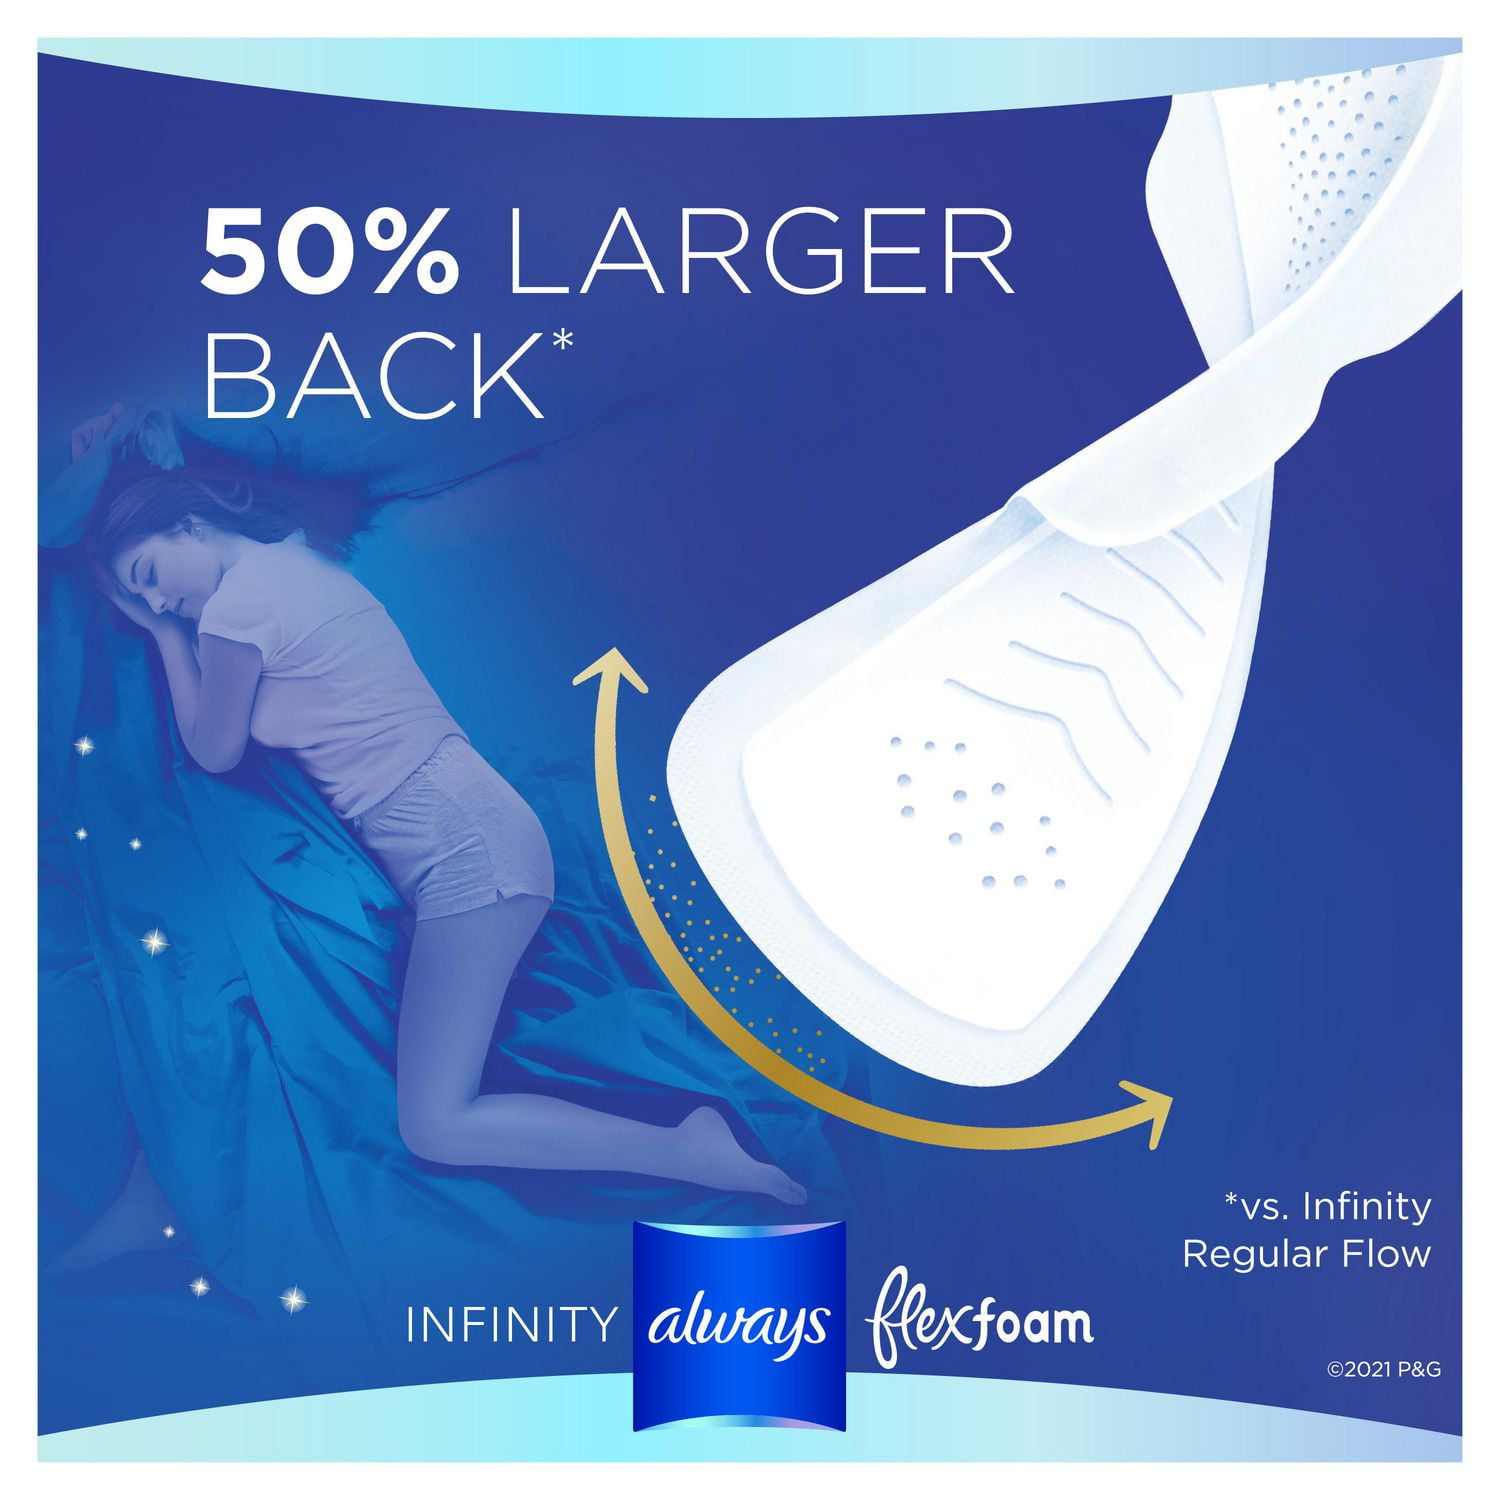 Always Radiant Feminine Pads for Women, Size 2 Heavy, with Wings, Scented,  48 CT - 48 ea